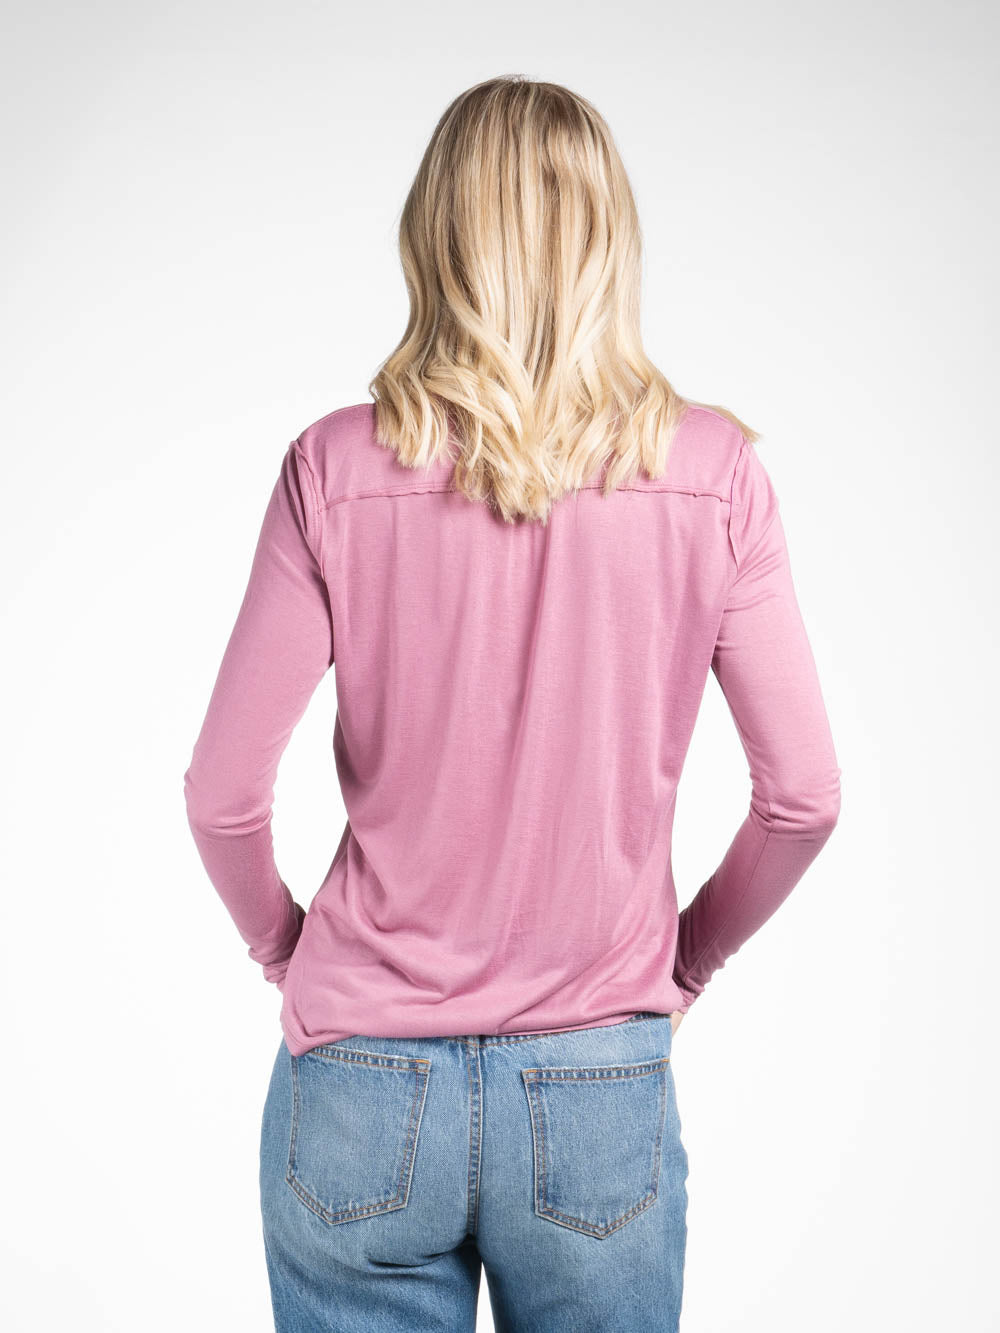 Long Sleeve Tops for Tall Ladies